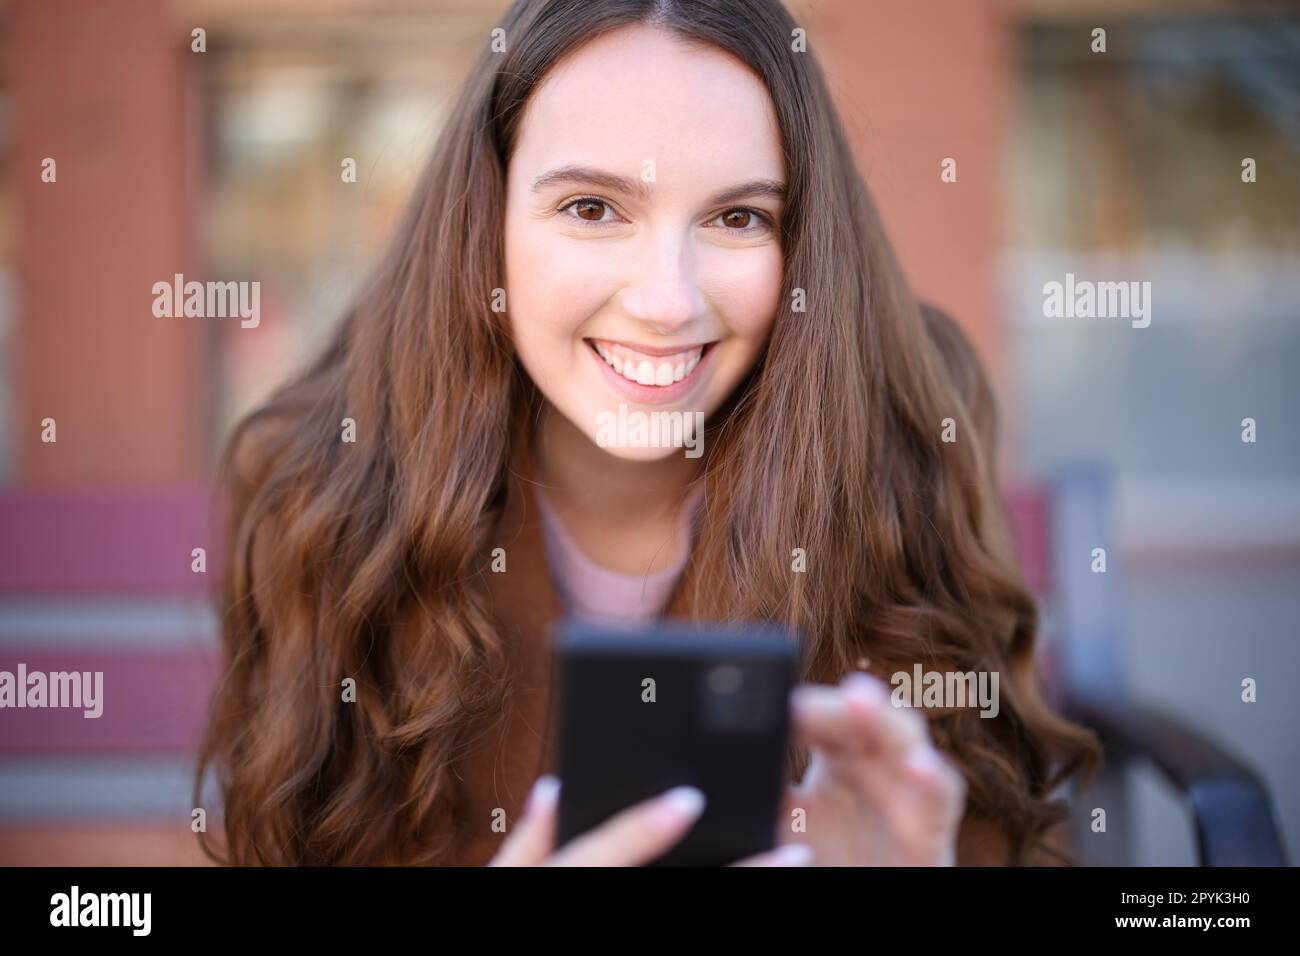 Happy woman on a bench looks at you holding phone Stock Photo